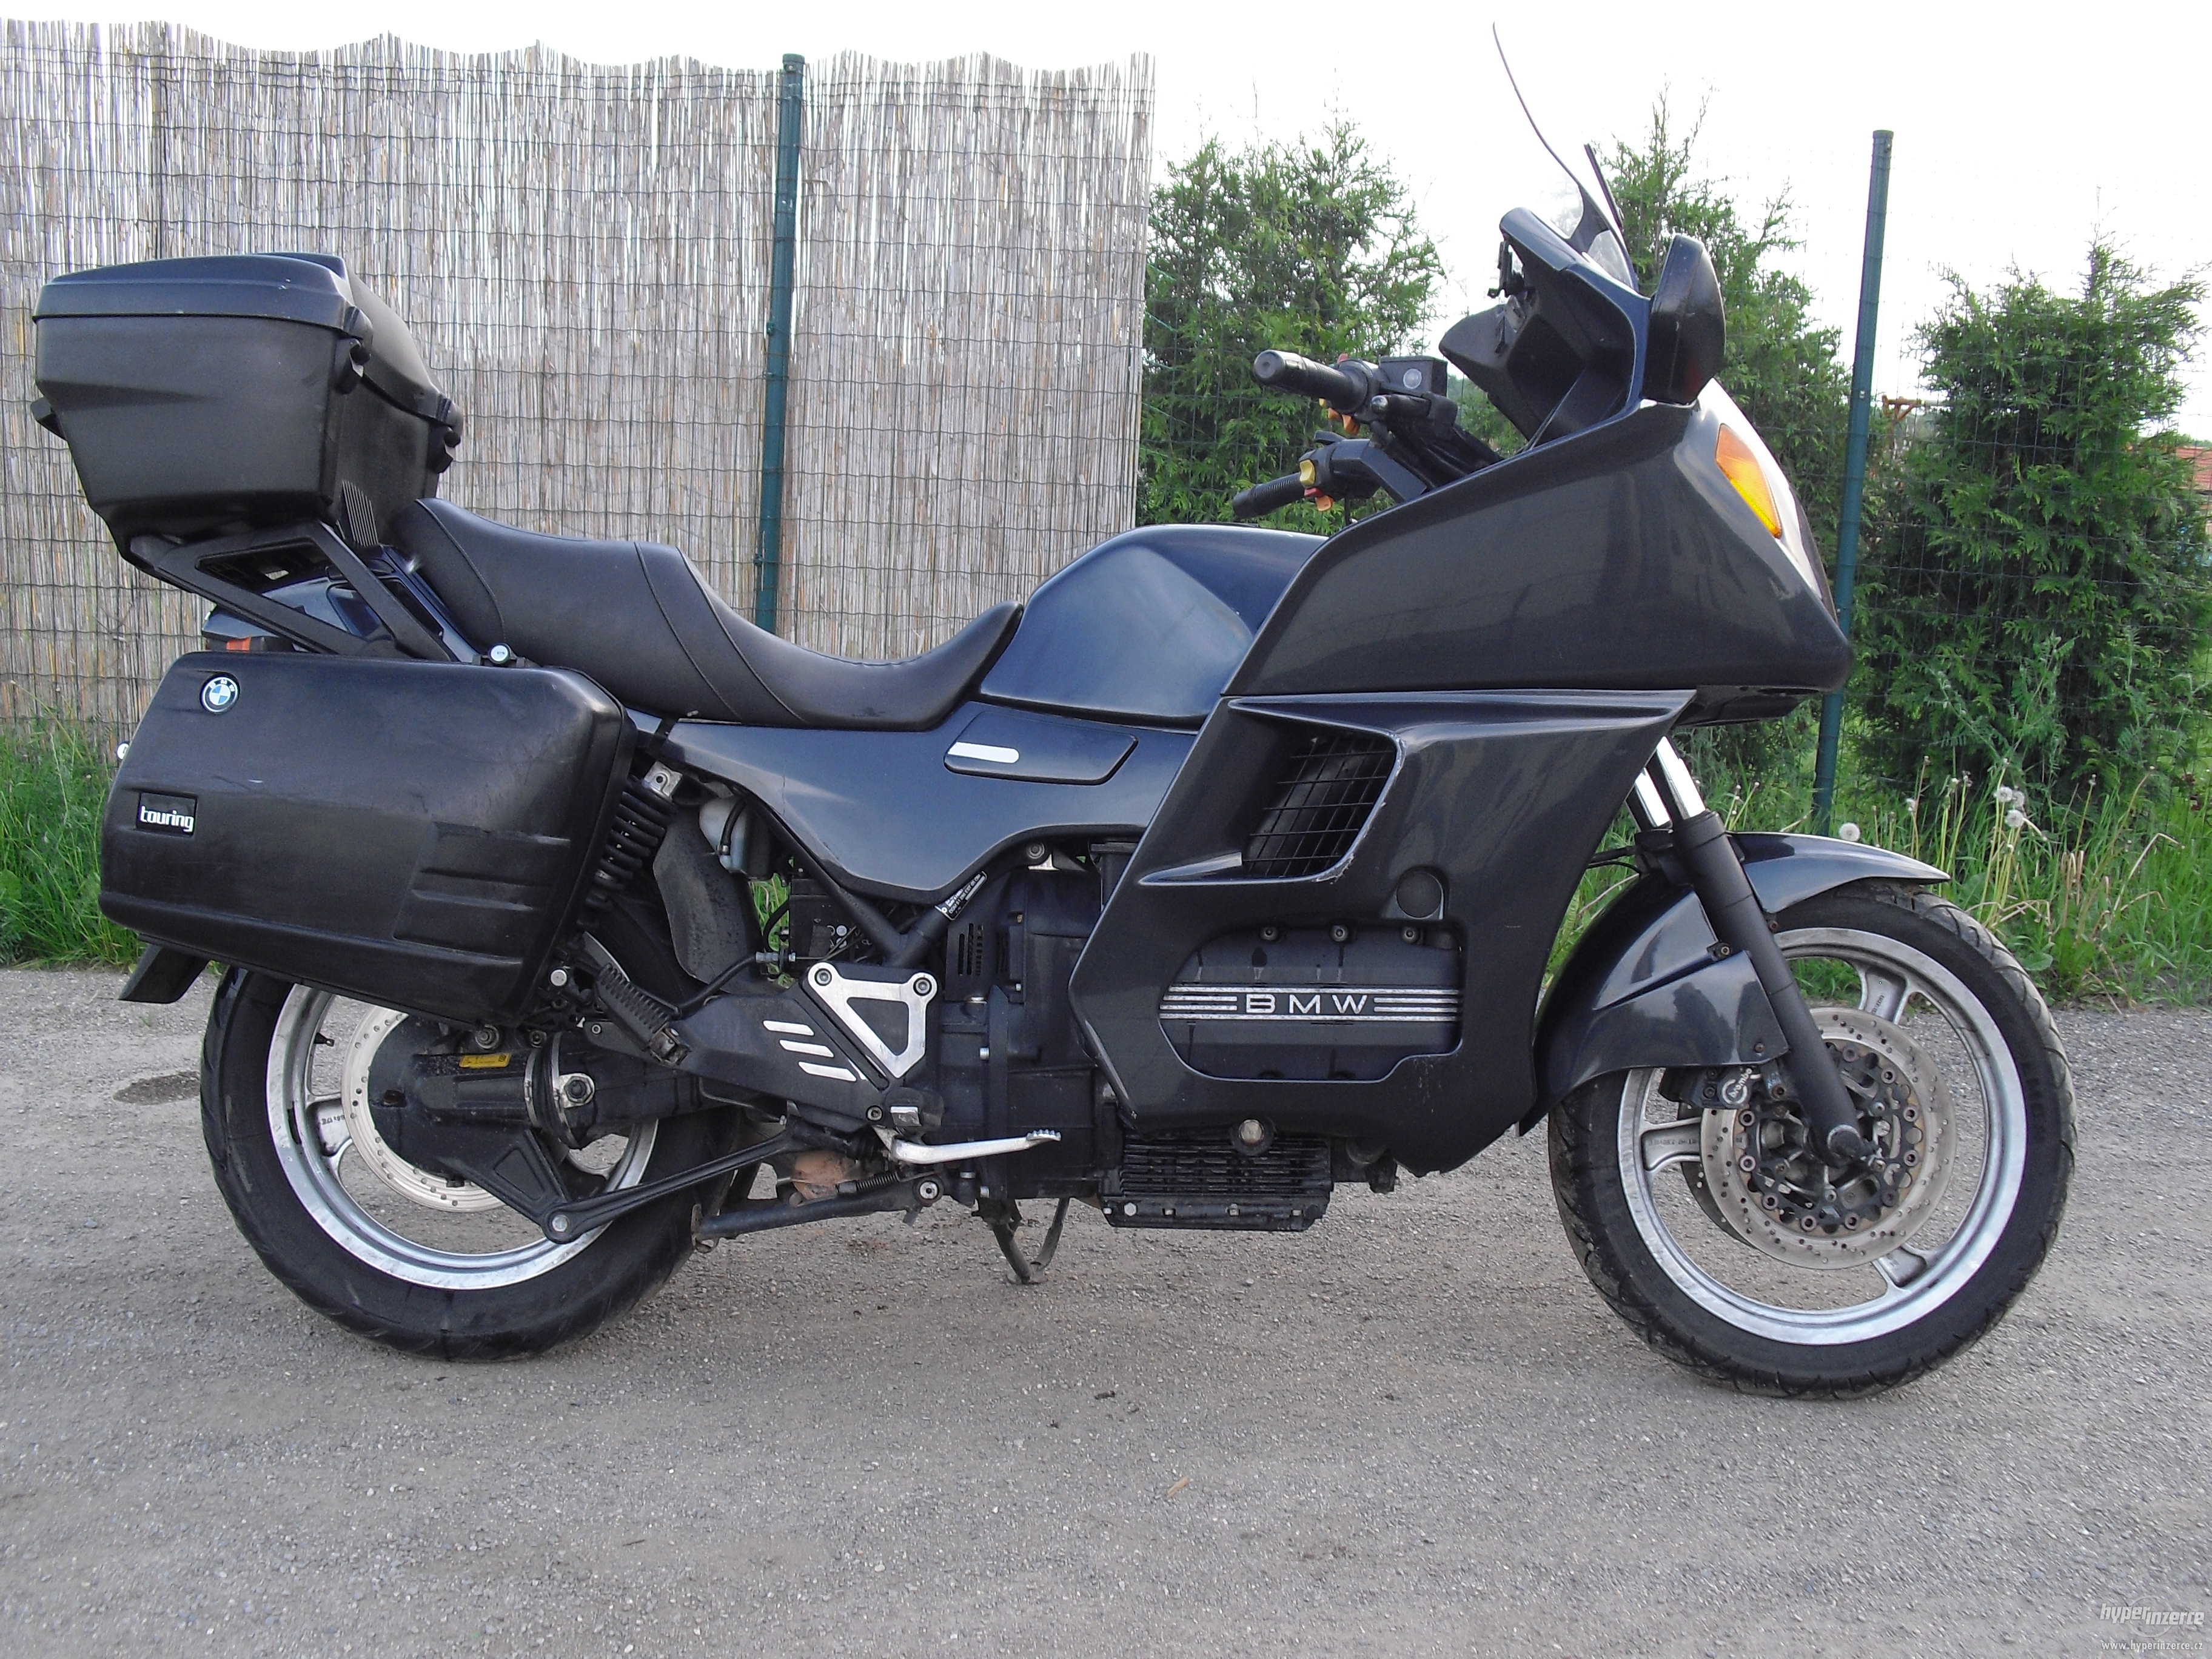 Review Of Bmw K 1100 Rs 1993 Pictures Live Photos Description Bmw K 1100 Rs 1993 Lovers Of Motorcycles